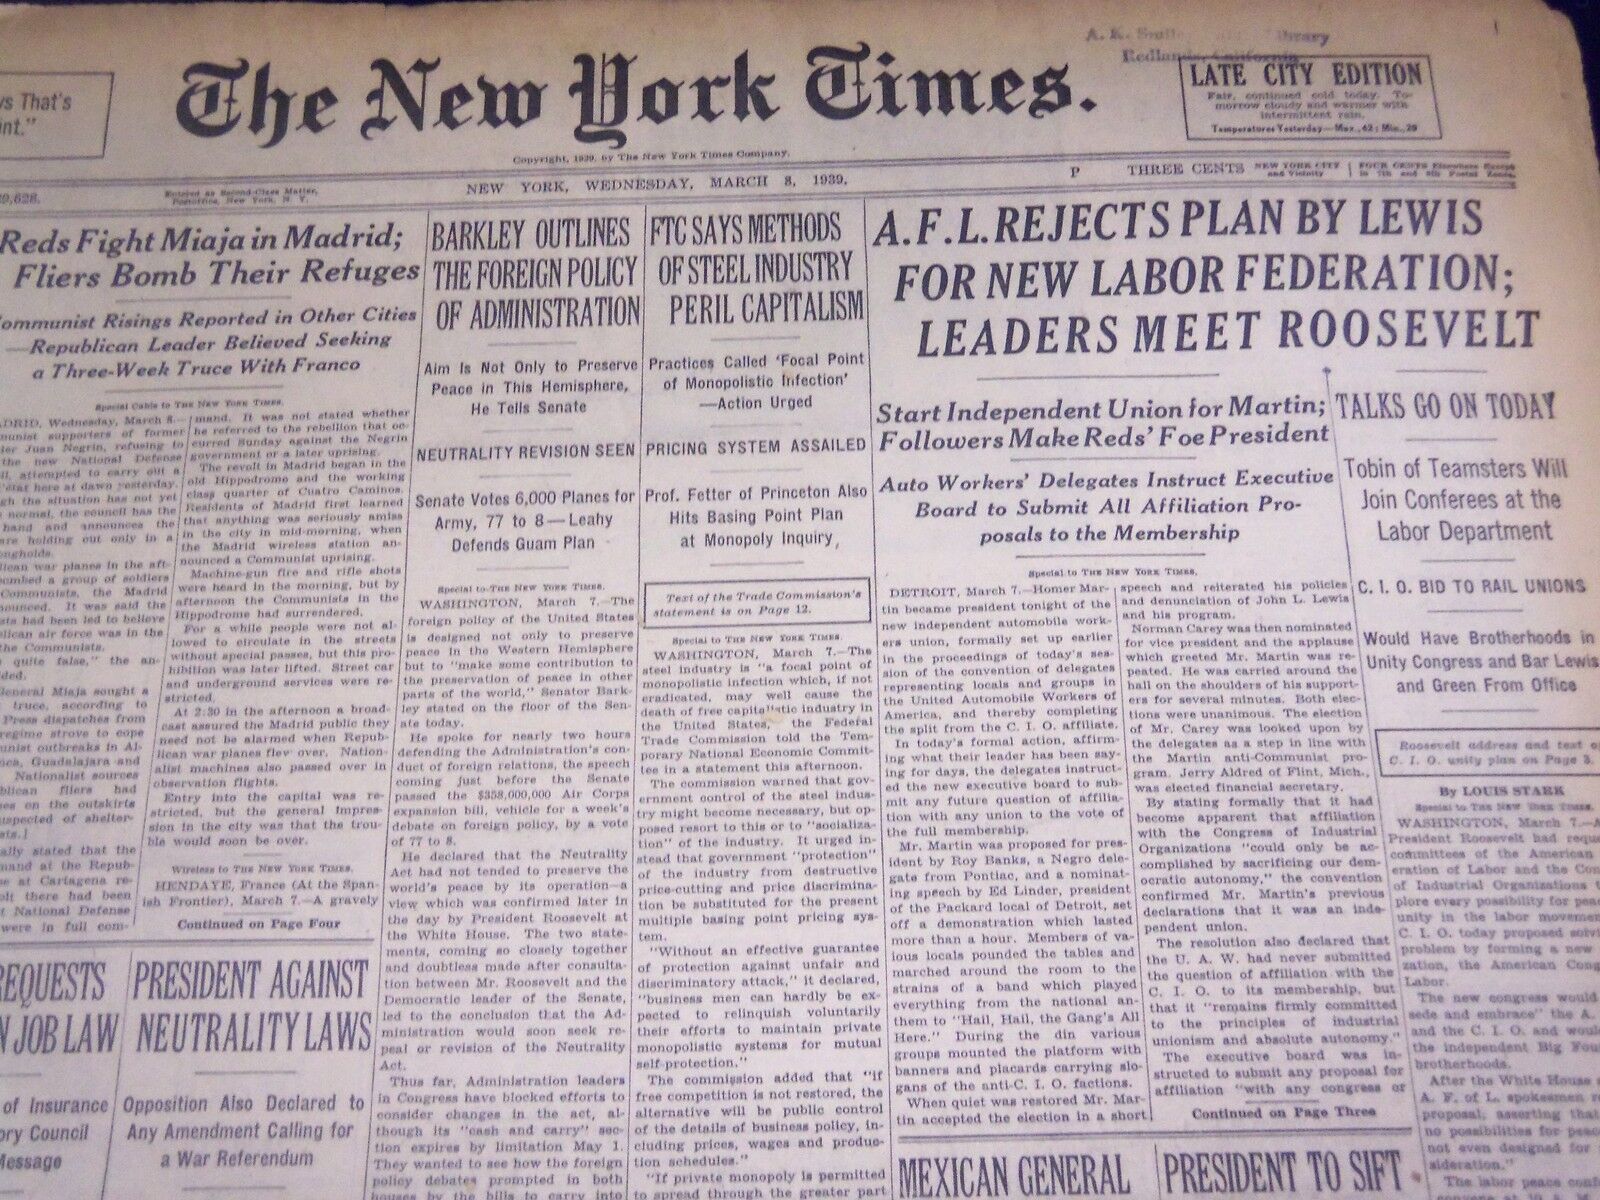 1939 MARCH 8 NEW YORK TIMES - A. F. L. REJECTS LEWIS PLAN - NT 3677